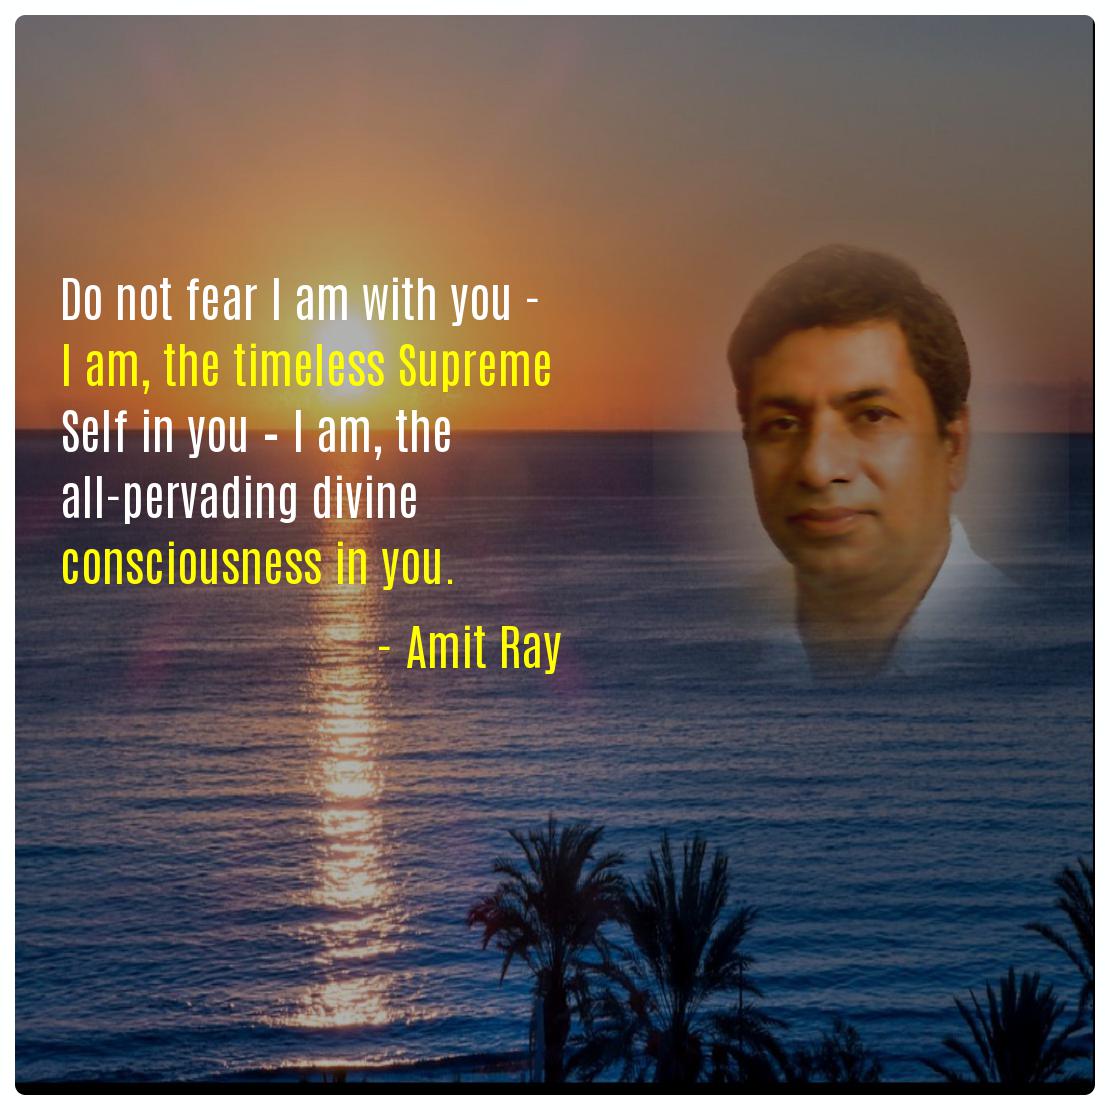 Do not fear I am with you - I am, the timeless Supreme Self in you – I am, the all-pervading divine consciousness in you. -- Amit Ray